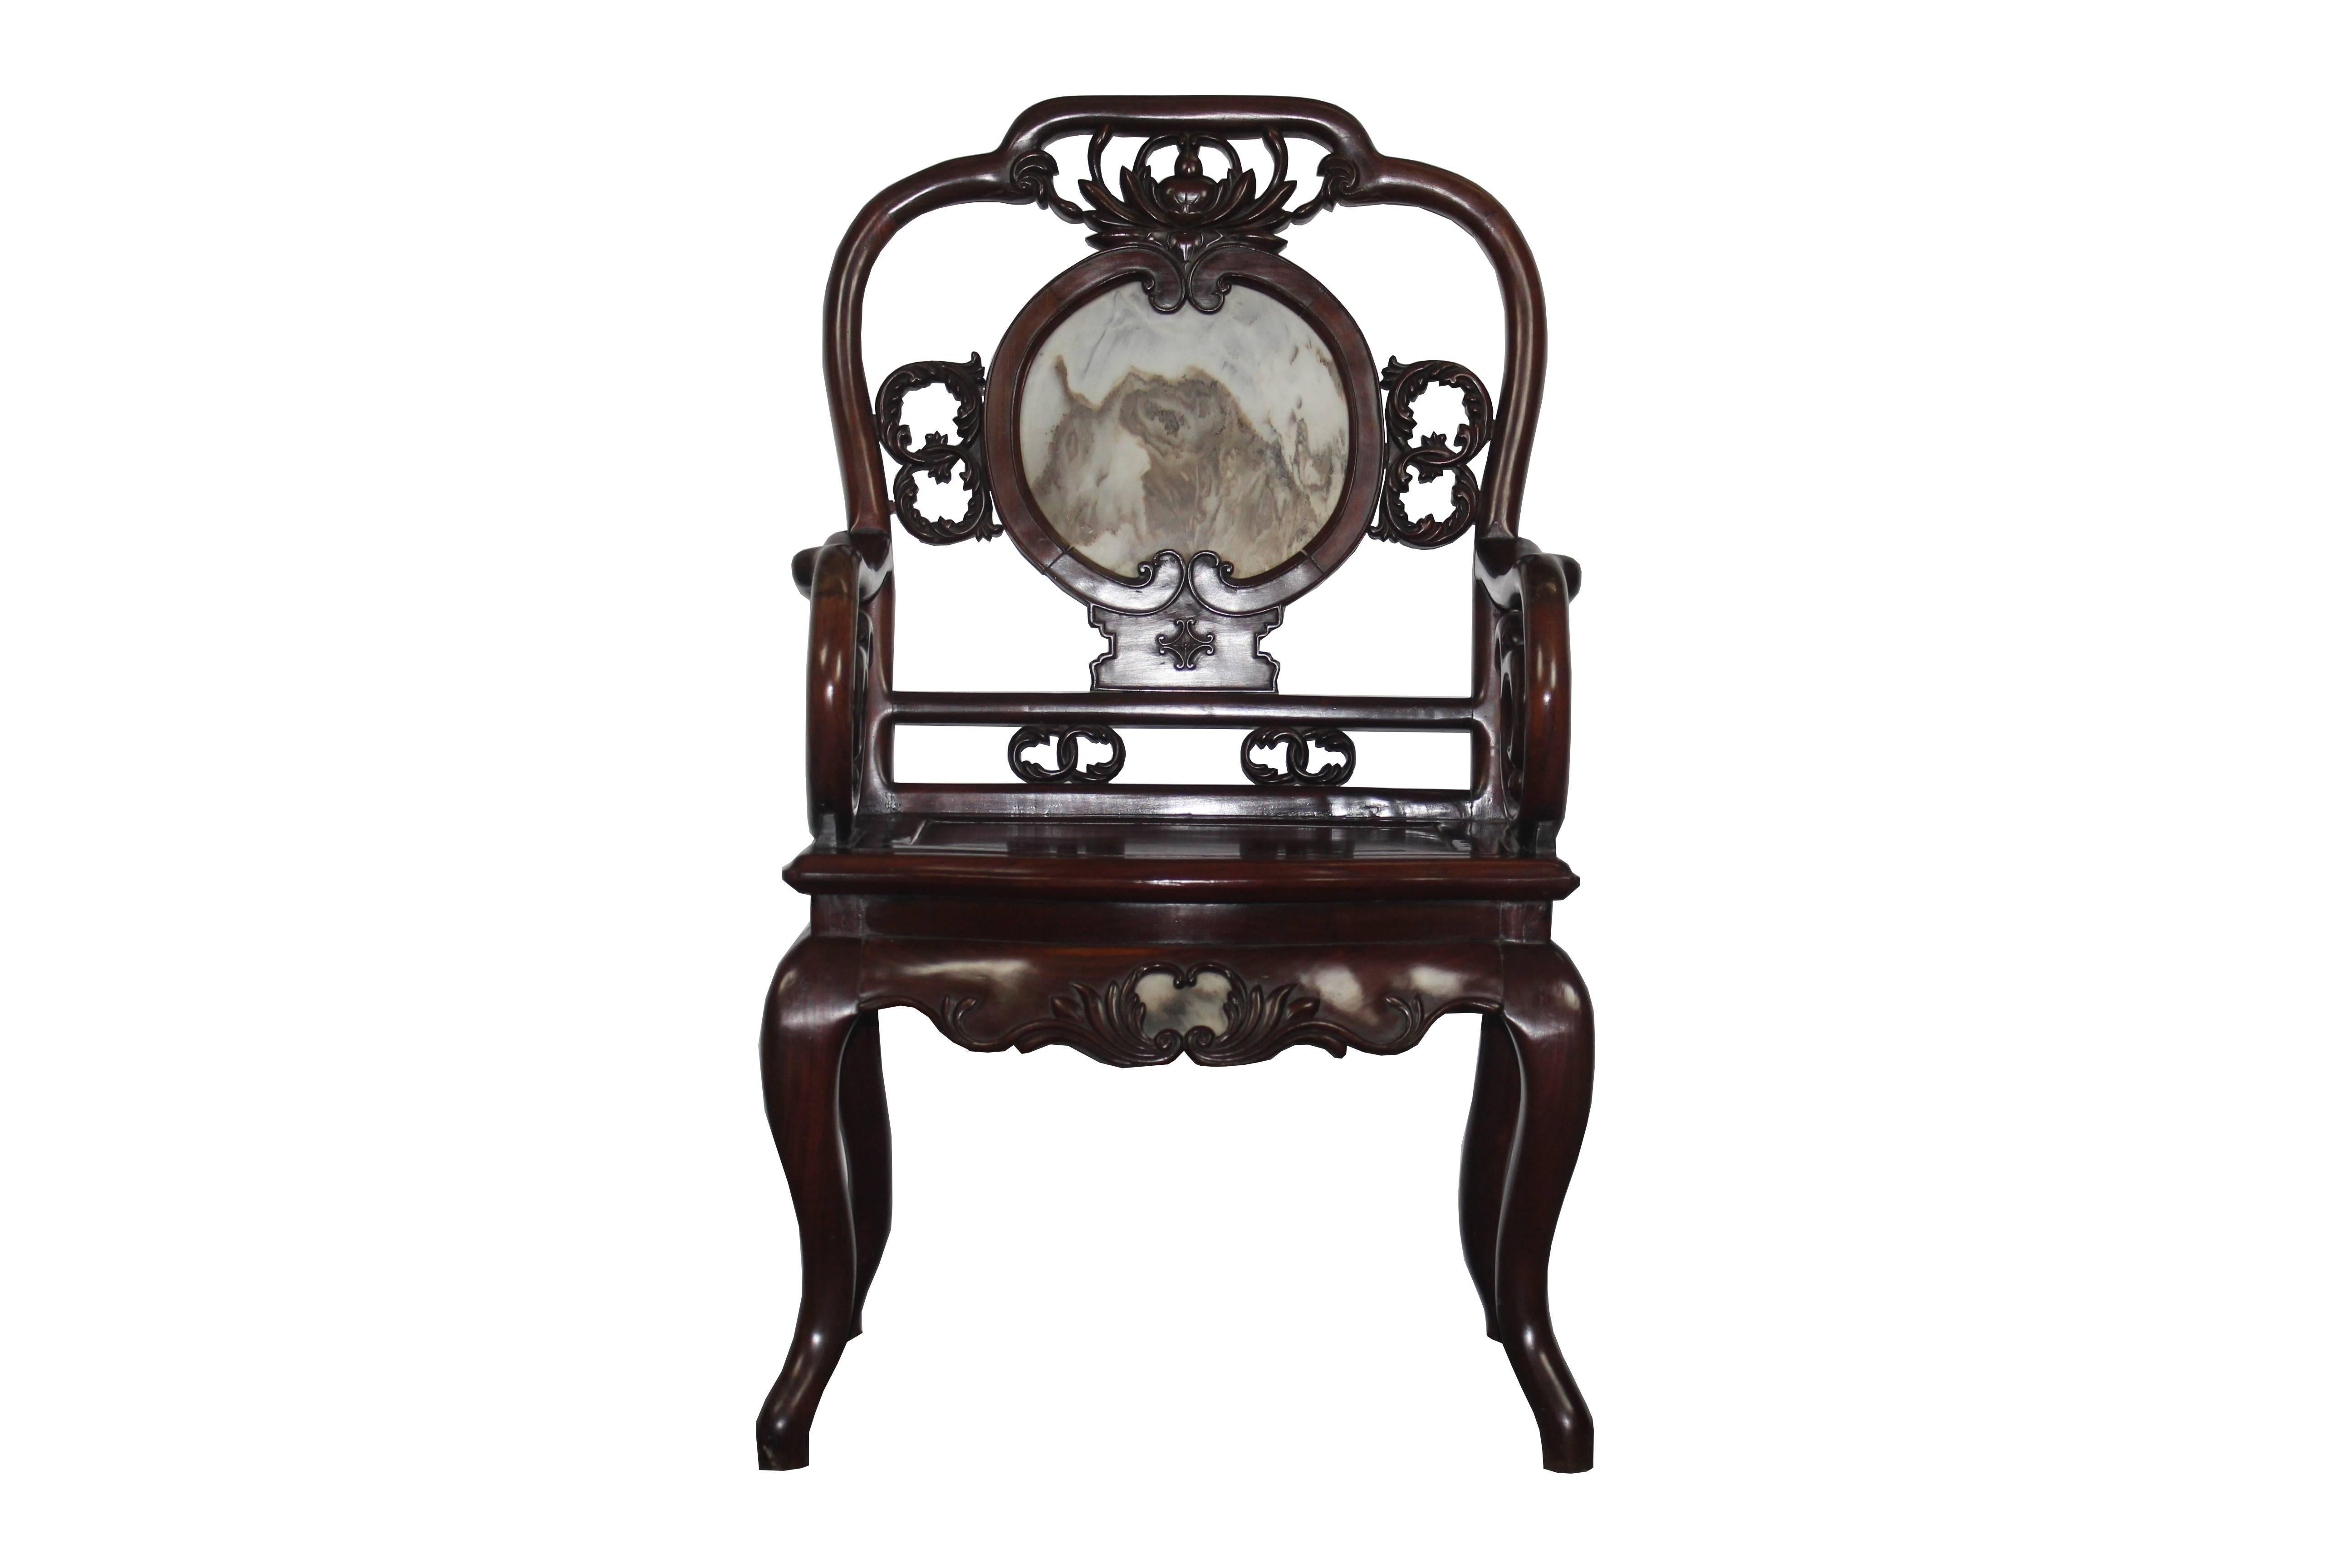 Magnificent classical style set of six hand-carved rosewood chairs, the back is inlaid in landscape stone, pierced apron, top rail and splat and three marble top rosewood side tables, circa 1880. Pair of tables 15